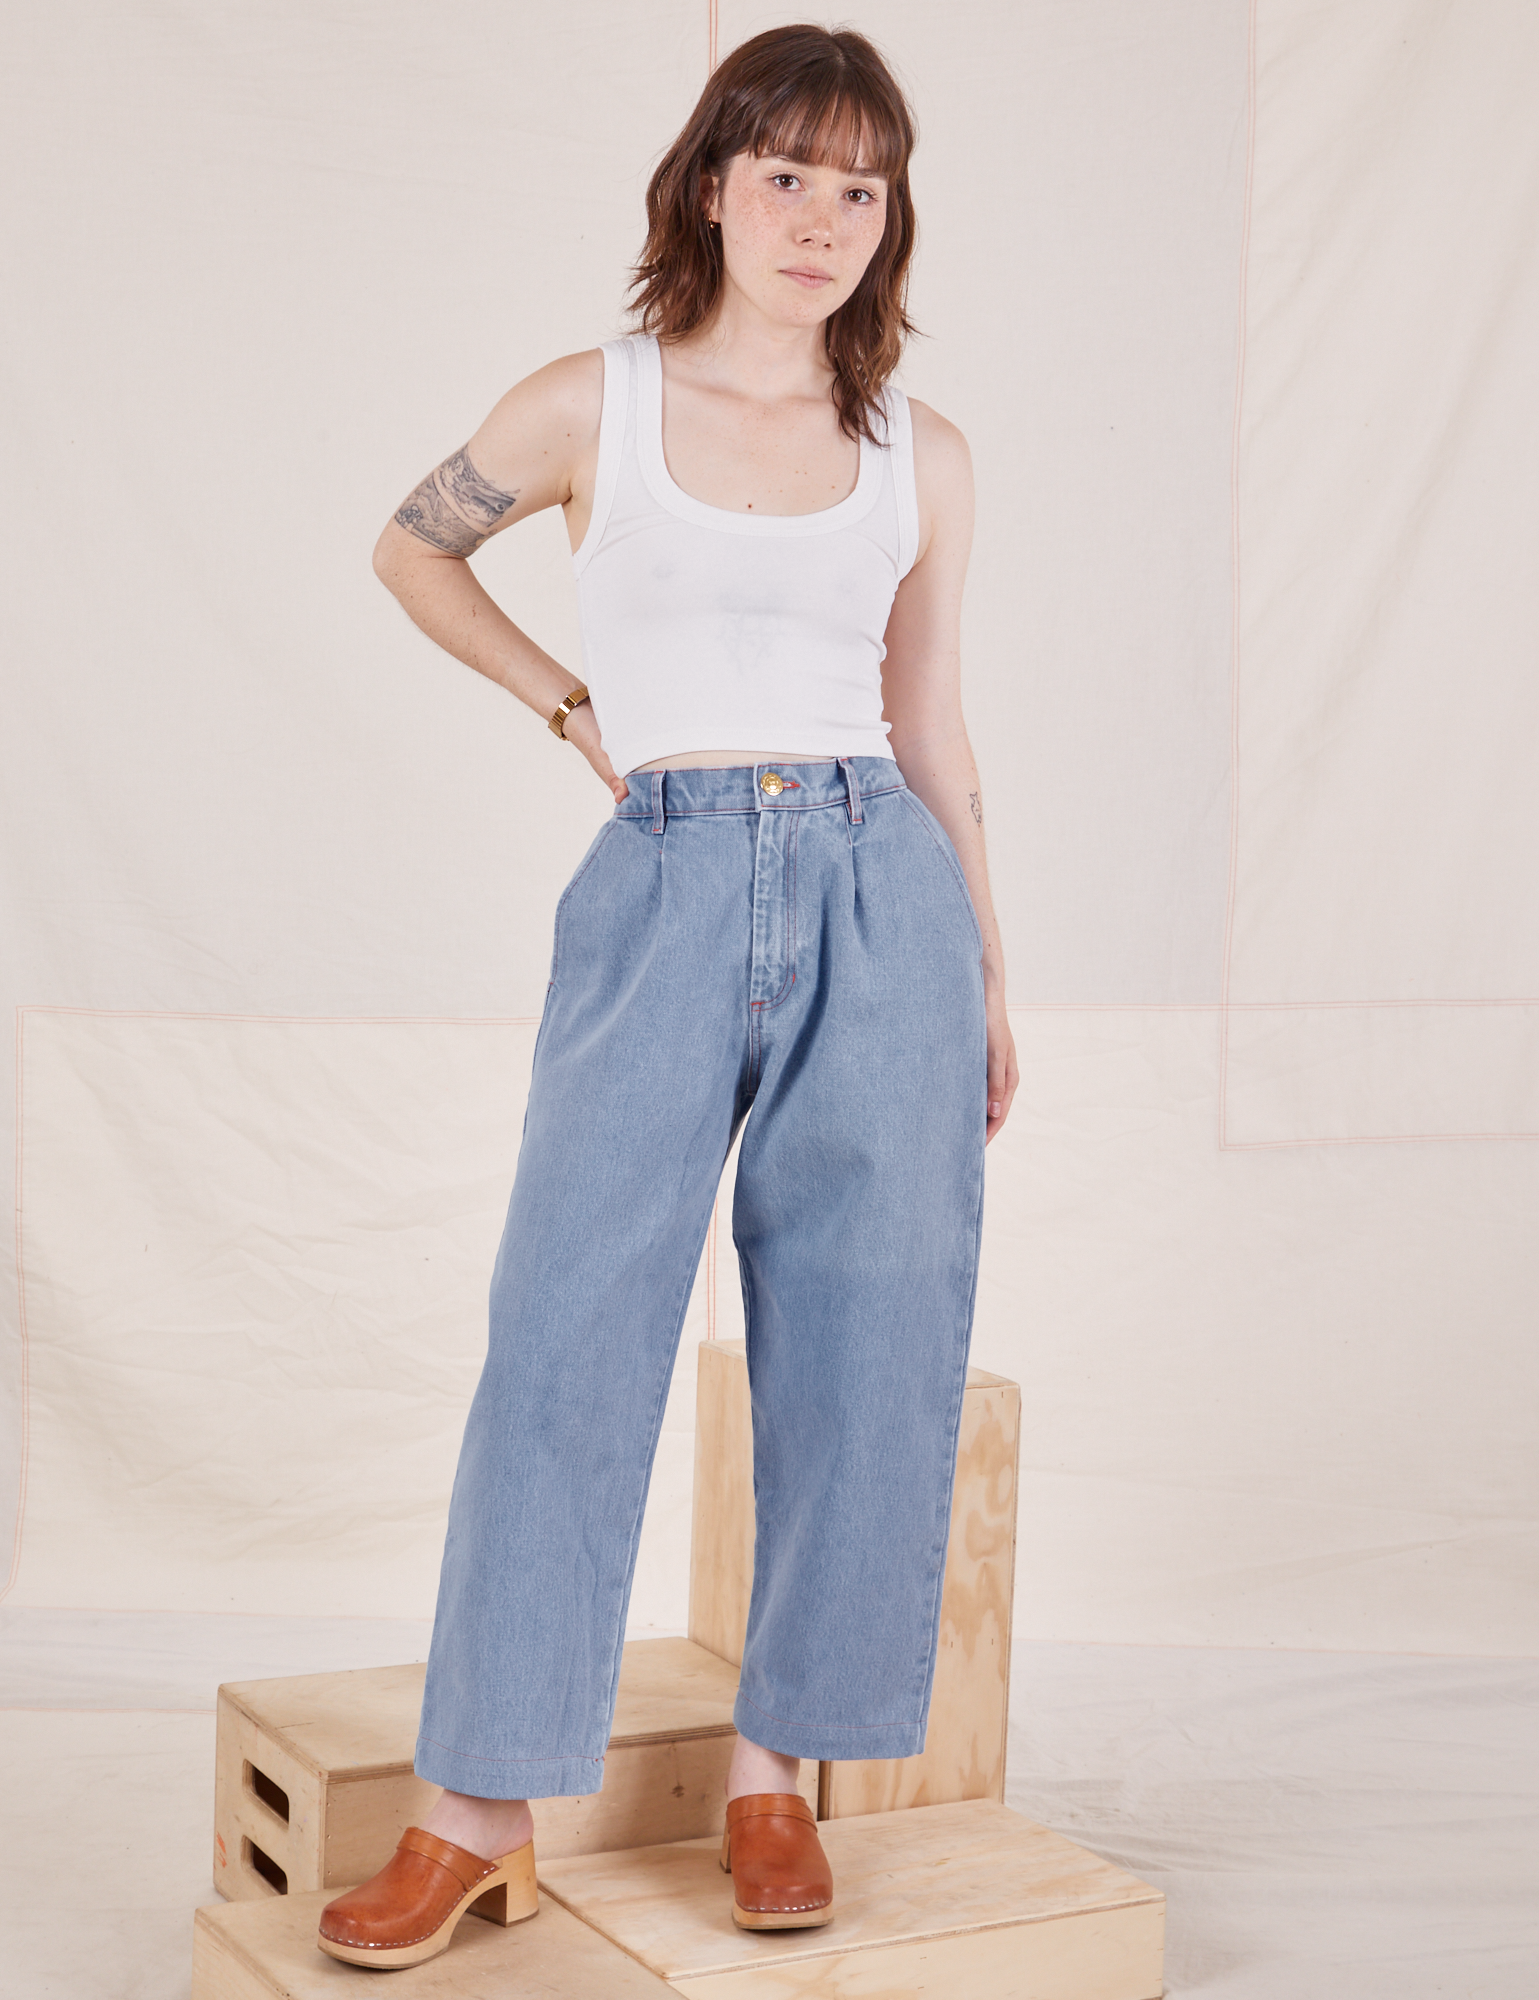 Hana is 5&#39;3&quot; and wearing XXS Petite Denim Trouser Jeans in Light Wash paired with vintage off-white Cropped Tank Top